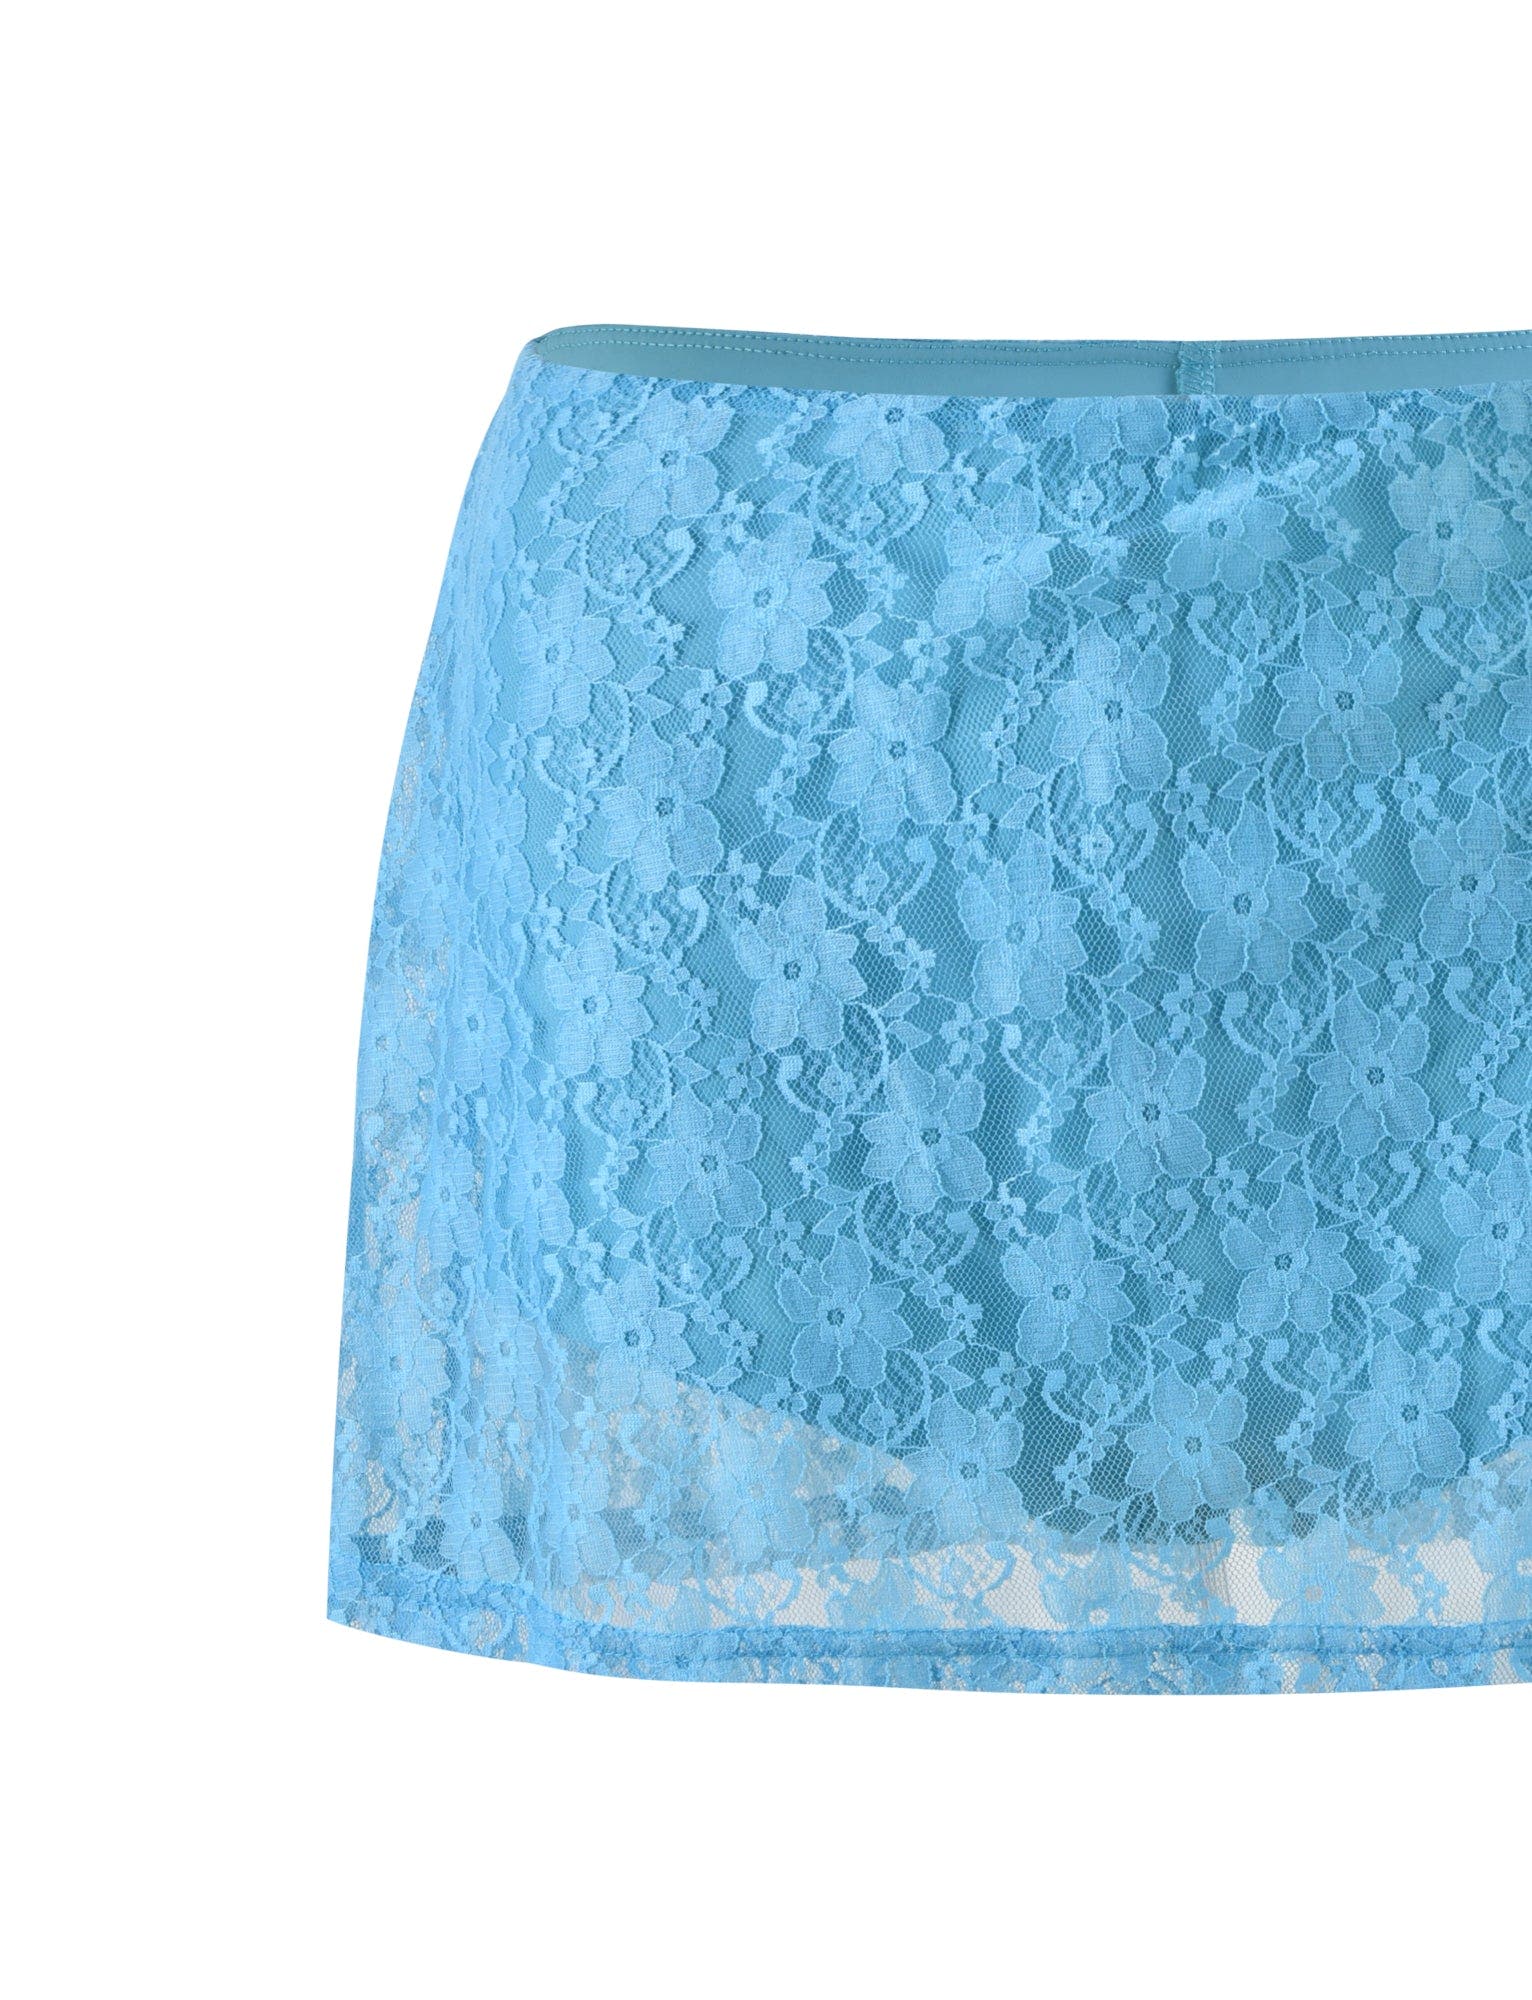 QUINLEY SKORT - BLUE : ICE BLUE : BRIGHT BLUE LACE